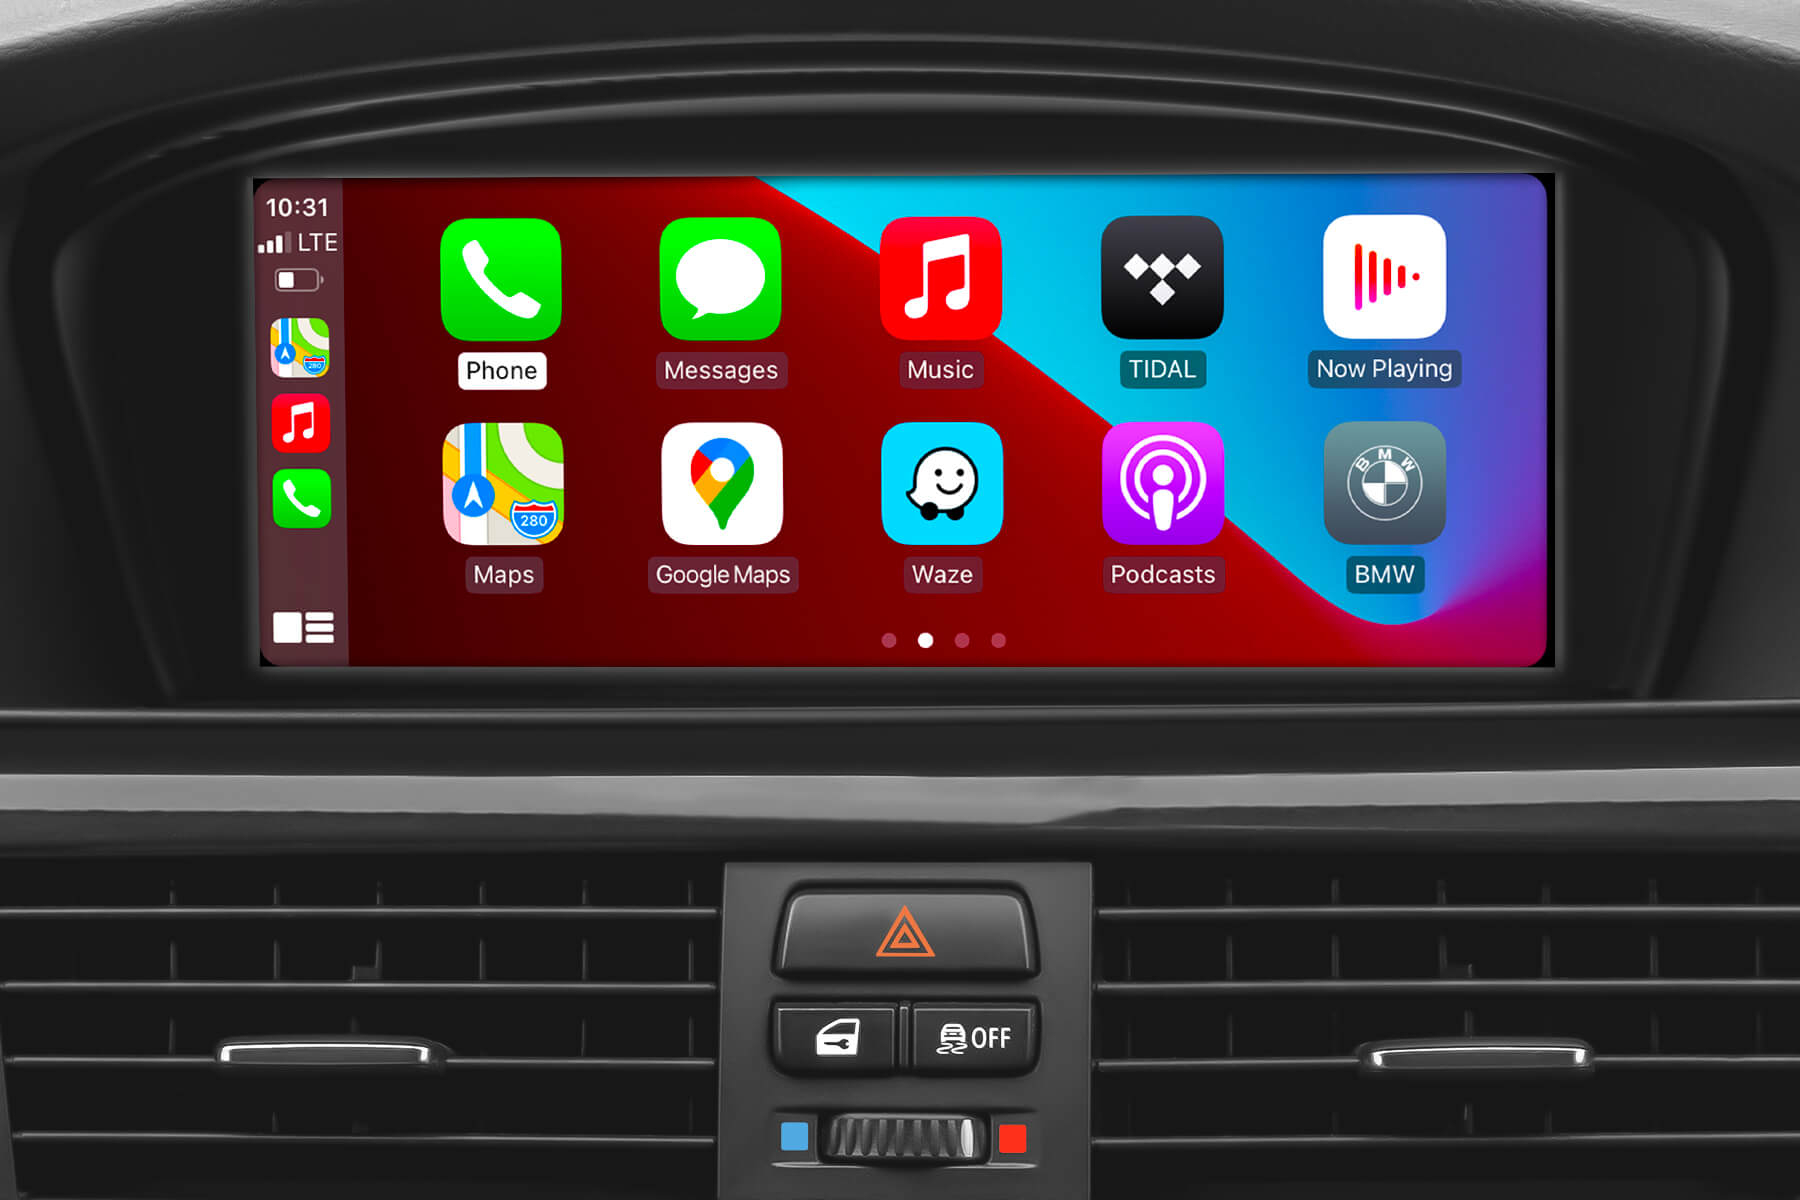 Apple Carplay for BMW with CIC system –